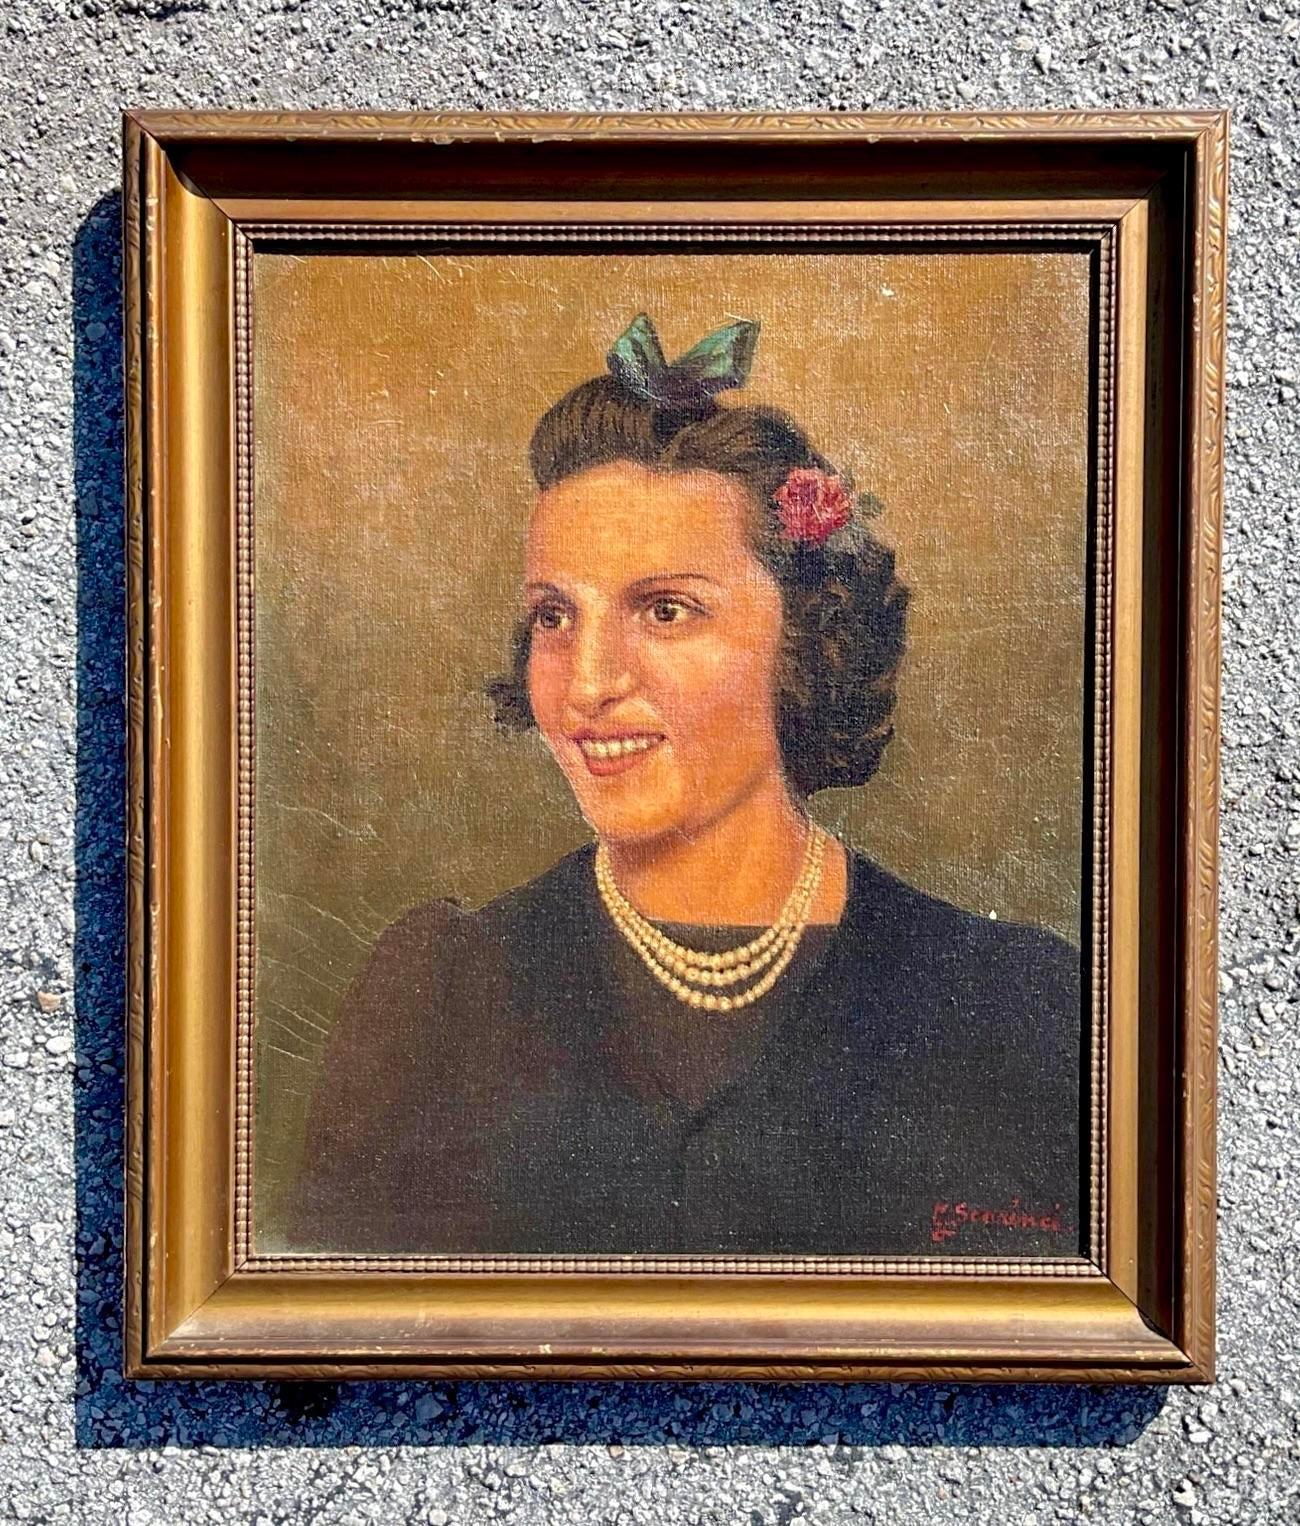 Vintage portrait with an aesthetic is specific to the era it was created. Depicts a smiling women wearing pearls with a dainty rose in her hair. Acquired from a Palm beach estate. 